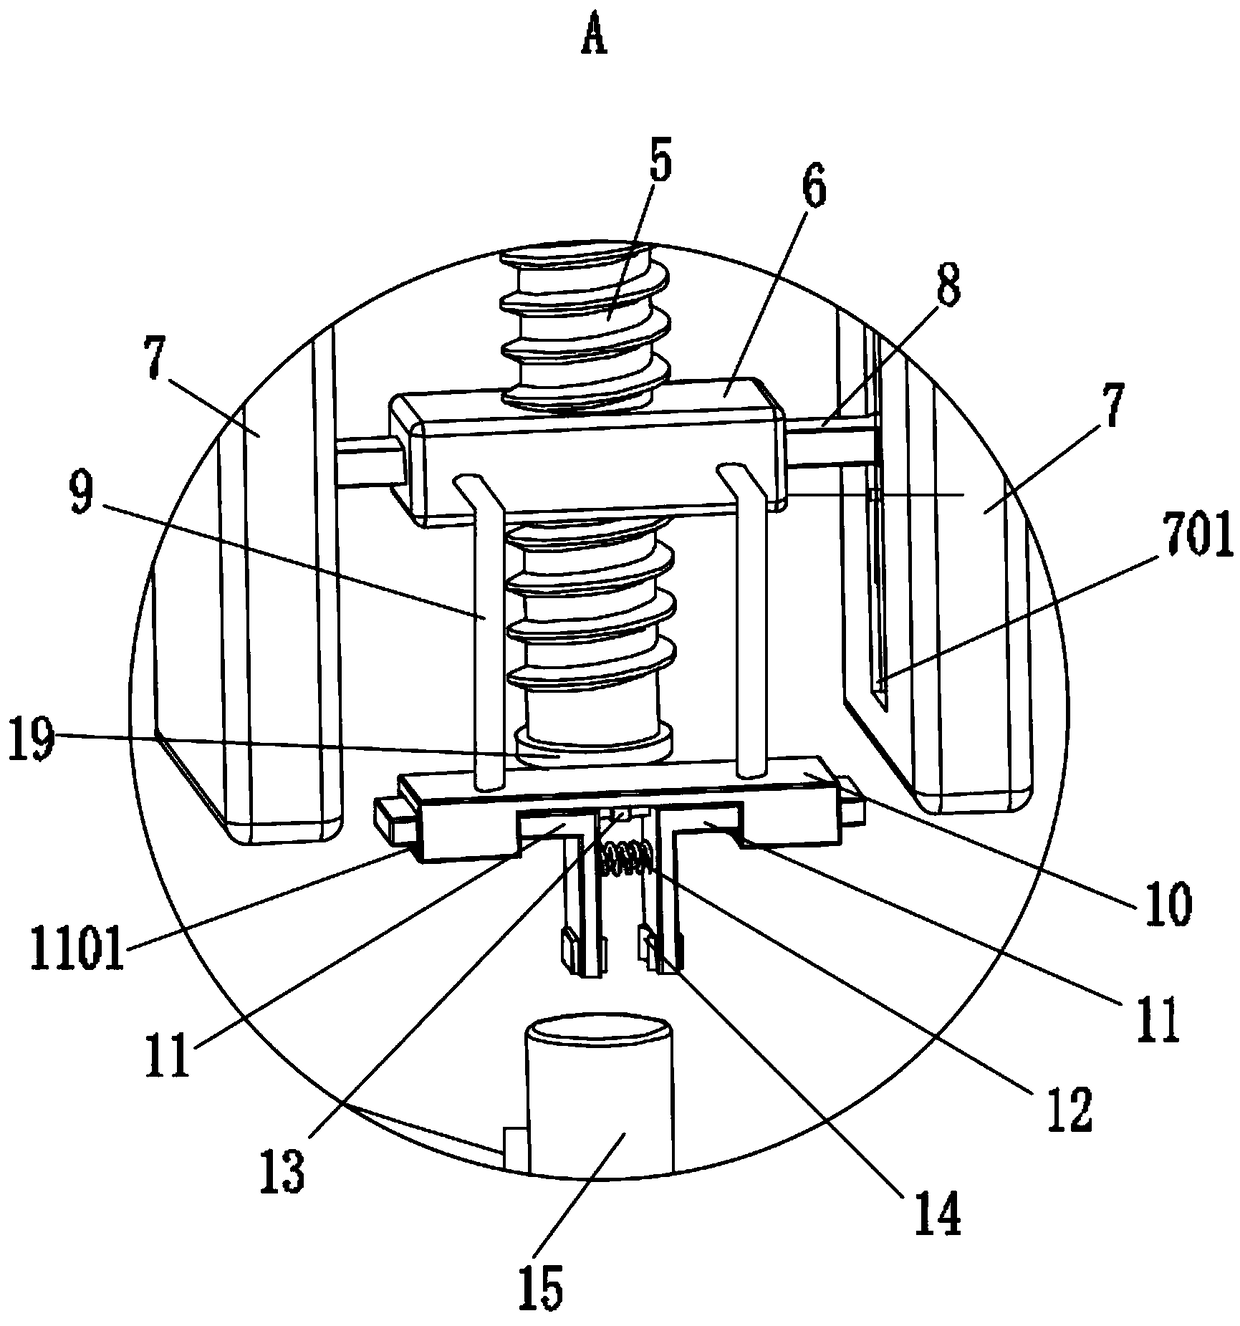 Puncturing device for gastrointestinal laparoscopic surgery